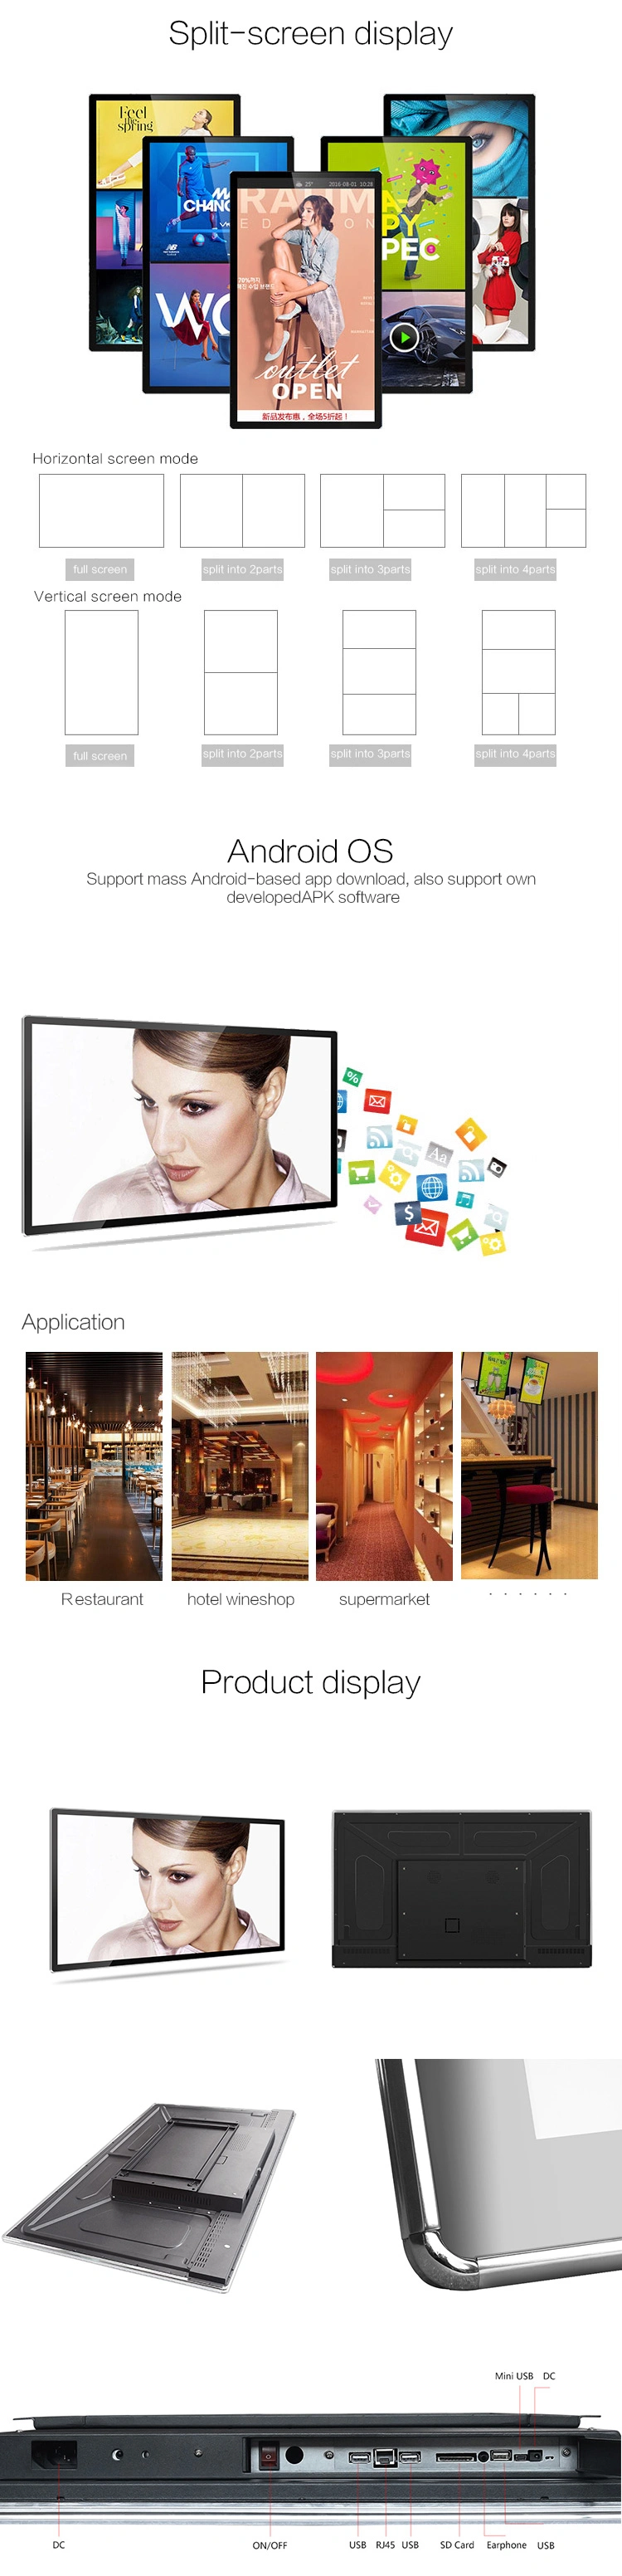 43 Inch Ultra Thin Wall Mount WiFi Wireless Advertising LCD Display Advertising Monitor USB Media Player